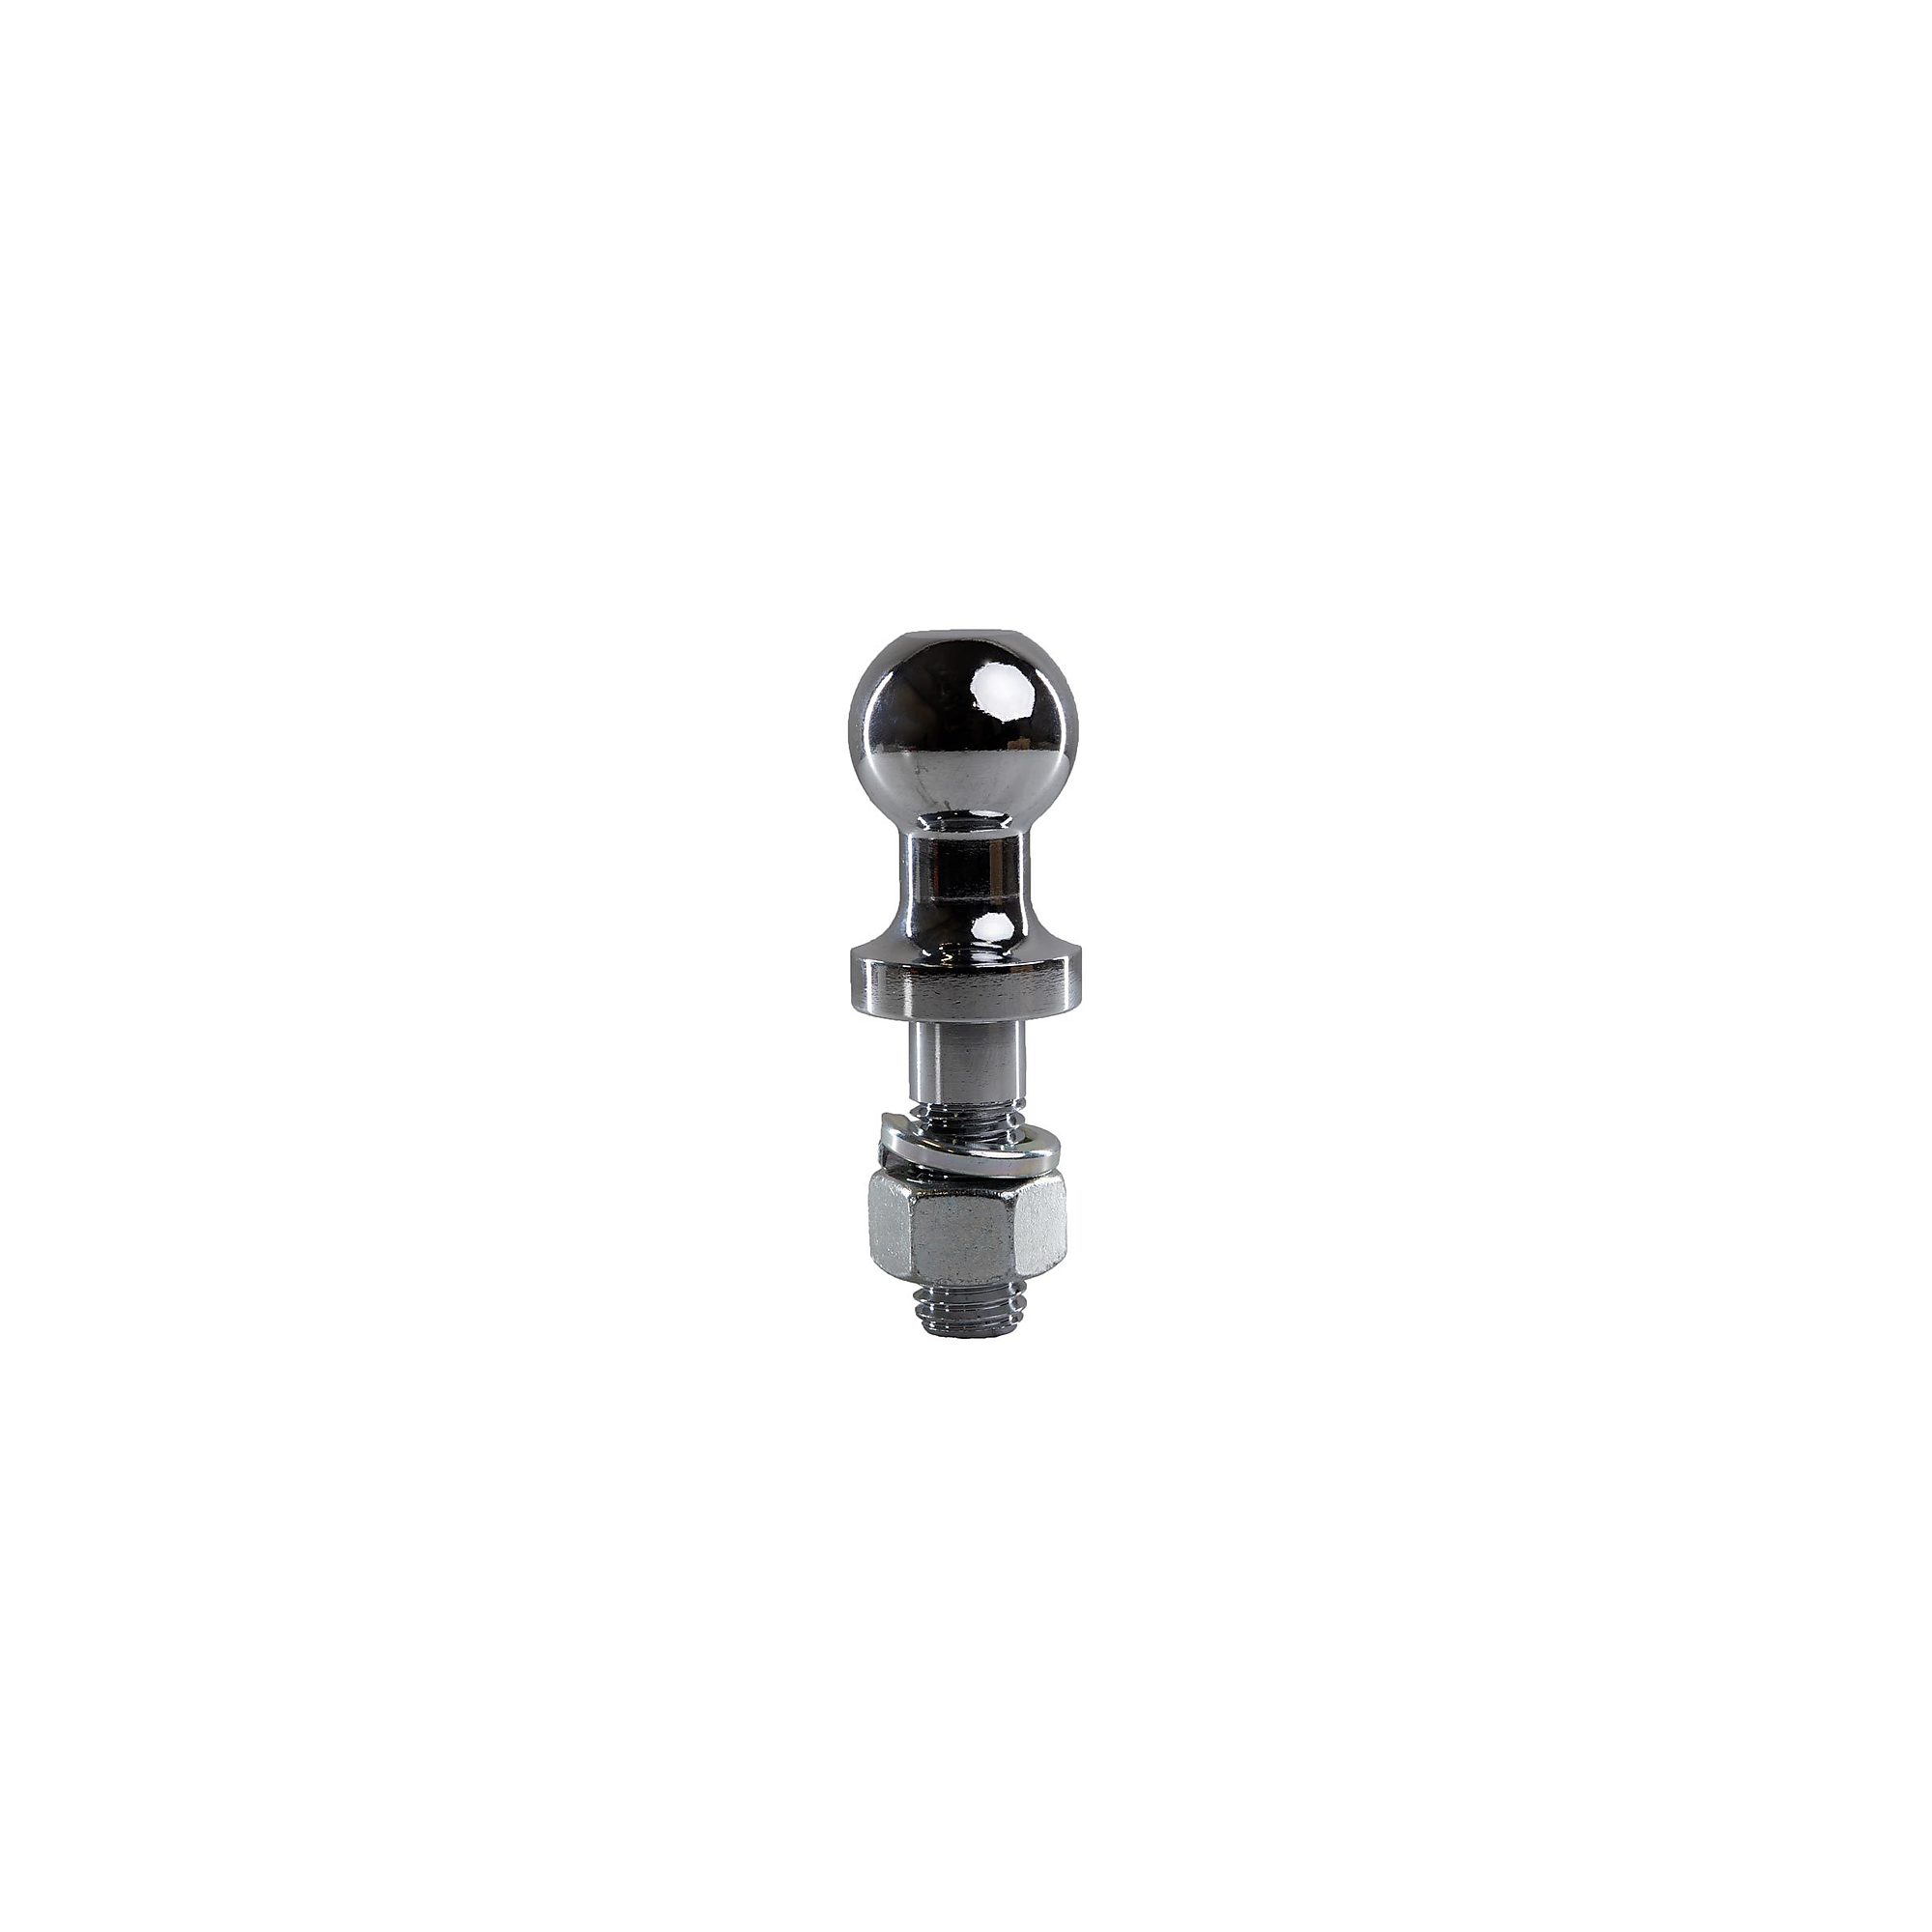 BulletProof Hitches, 1-1/4Inch HITCH-MOUNTED SWAY CONTROL BALL, Fits Receiver Size Multiple in, Model SWAYCONTROLBALL114